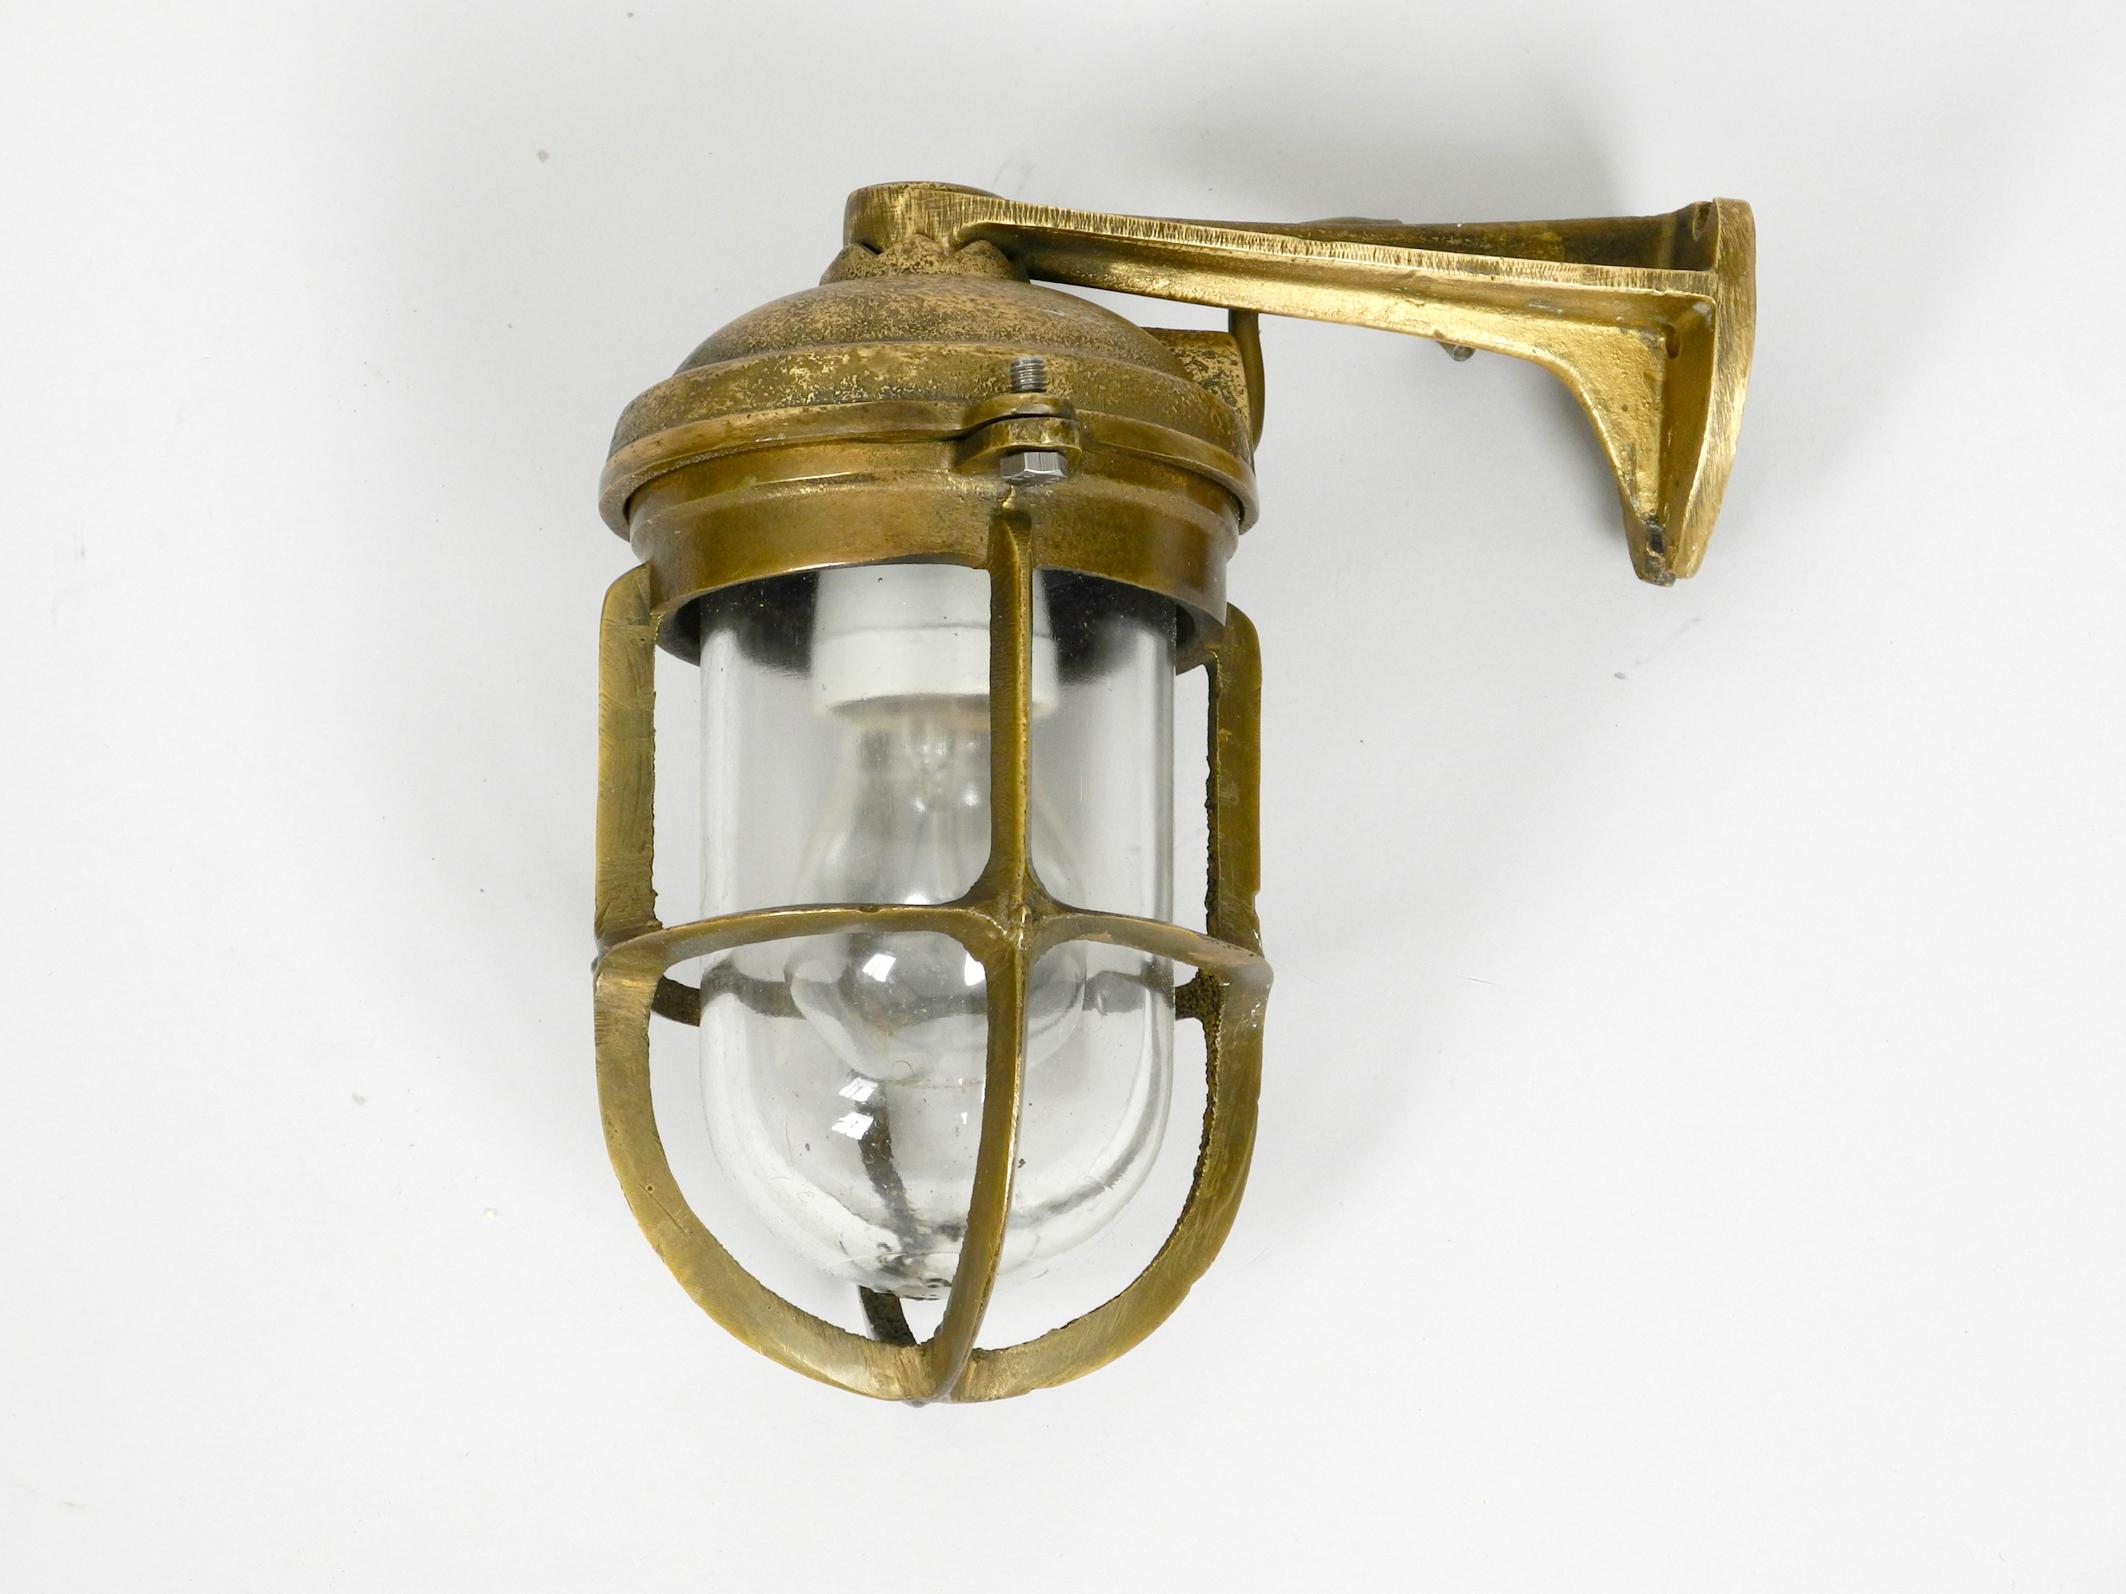 Heavy 1950s ship wall lamp in cast brass.
Beautiful maritime design. With original glass shade. 
No damages to the entire lamp, no cracks or chipping on the glass shade.
100% original condition and fully functional.
Shiny brass. Very nice patina